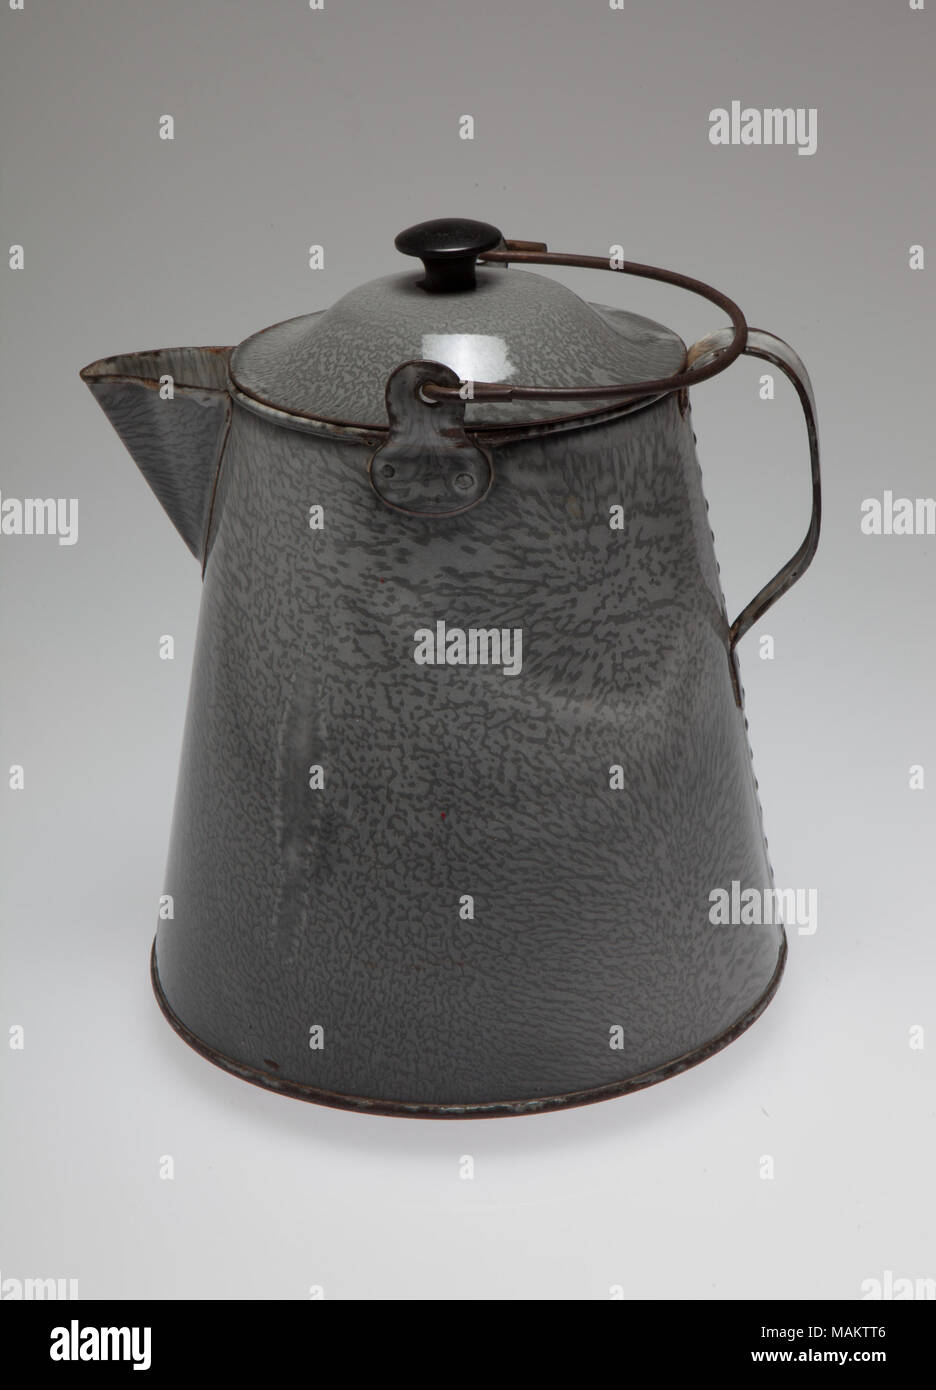 https://c8.alamy.com/comp/MAKTT6/large-gray-granite-ware-coffee-boiler-with-lid-and-bail-handle-title-large-coffee-boiler-circa-1895-st-louis-stamping-co-MAKTT6.jpg